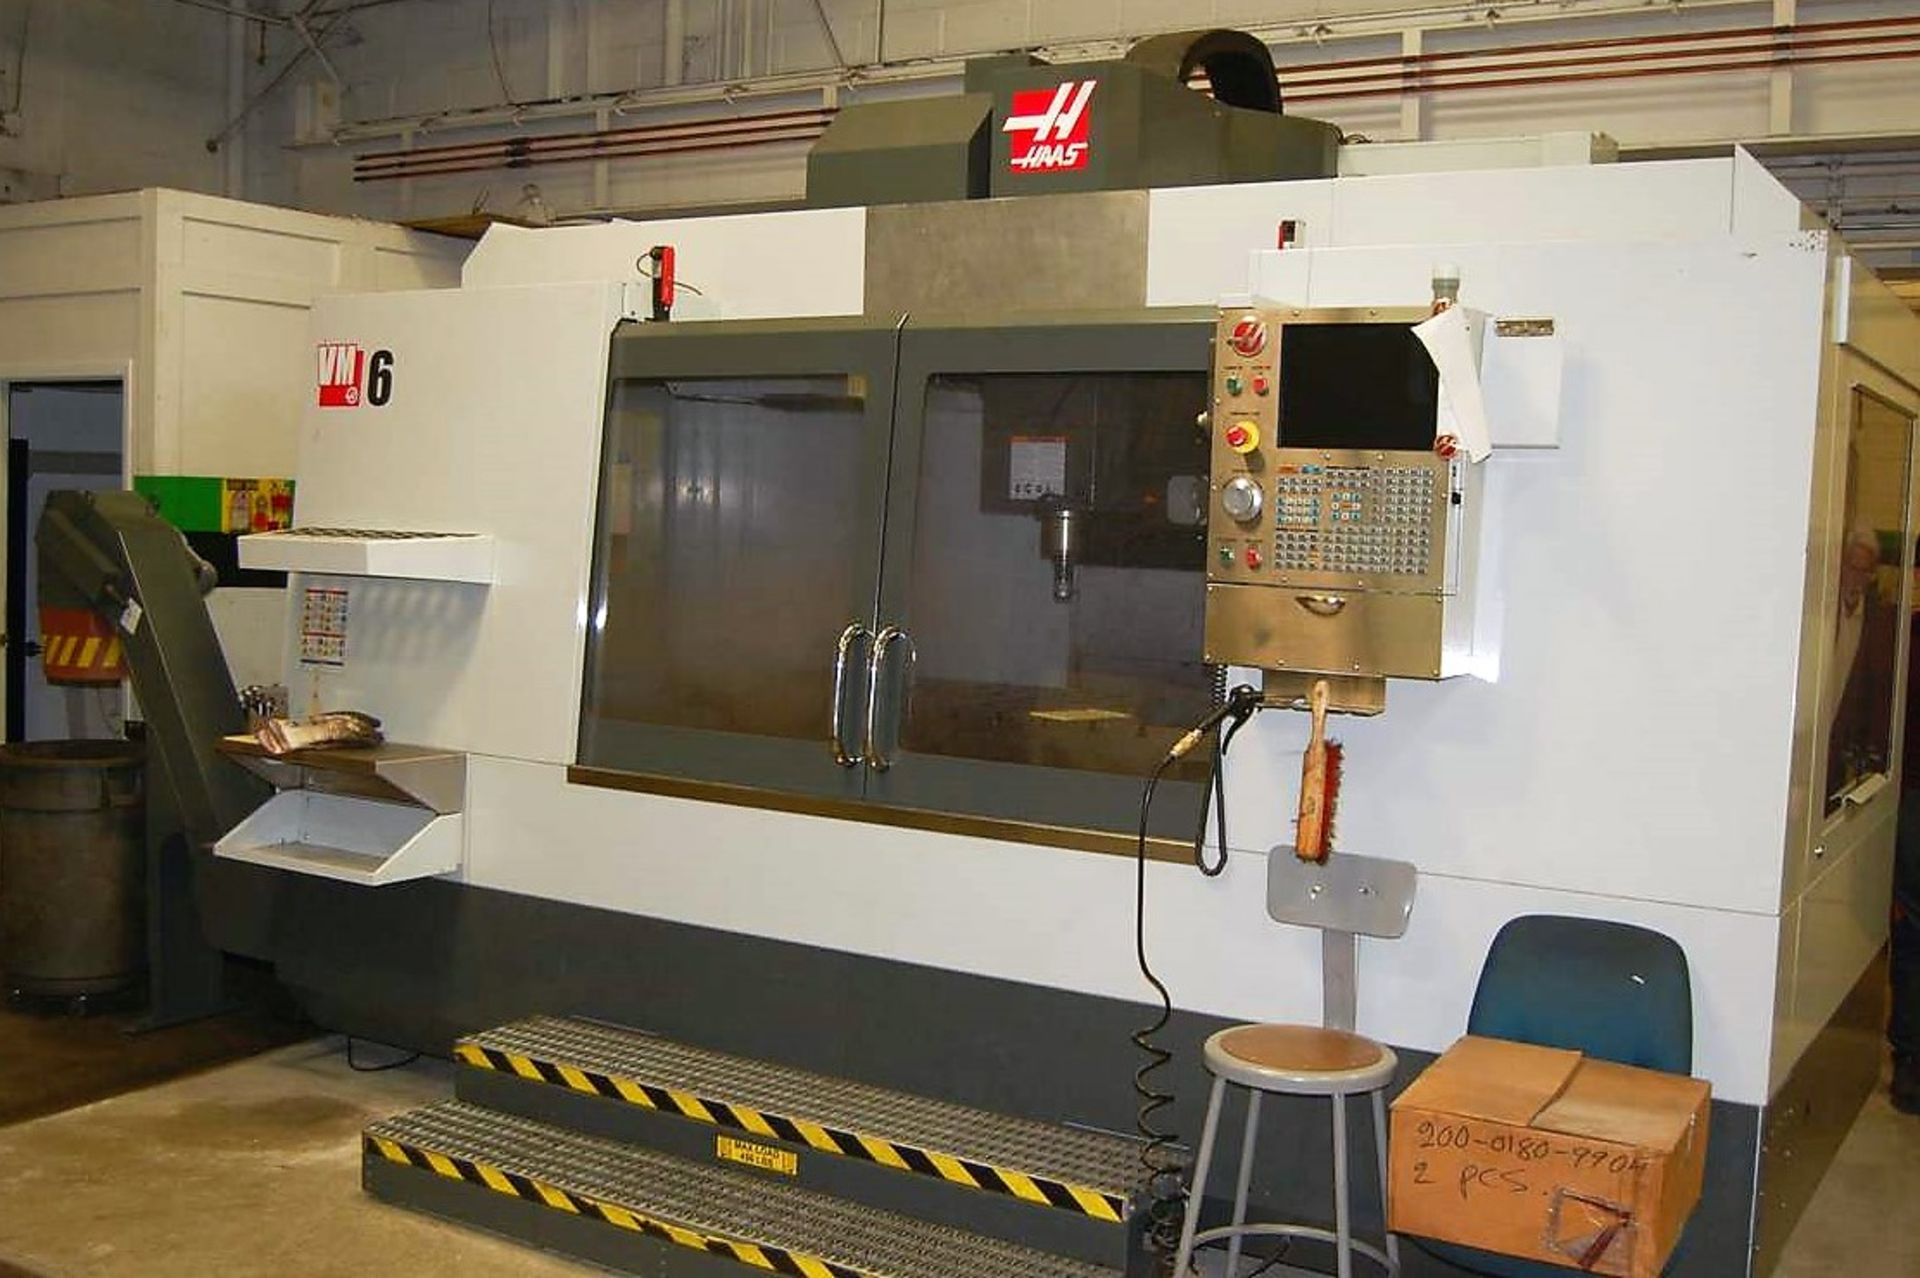 Haas Model VM-6 3-Axis Mold Maker CNC Vertical Machining Center - Image 13 of 17